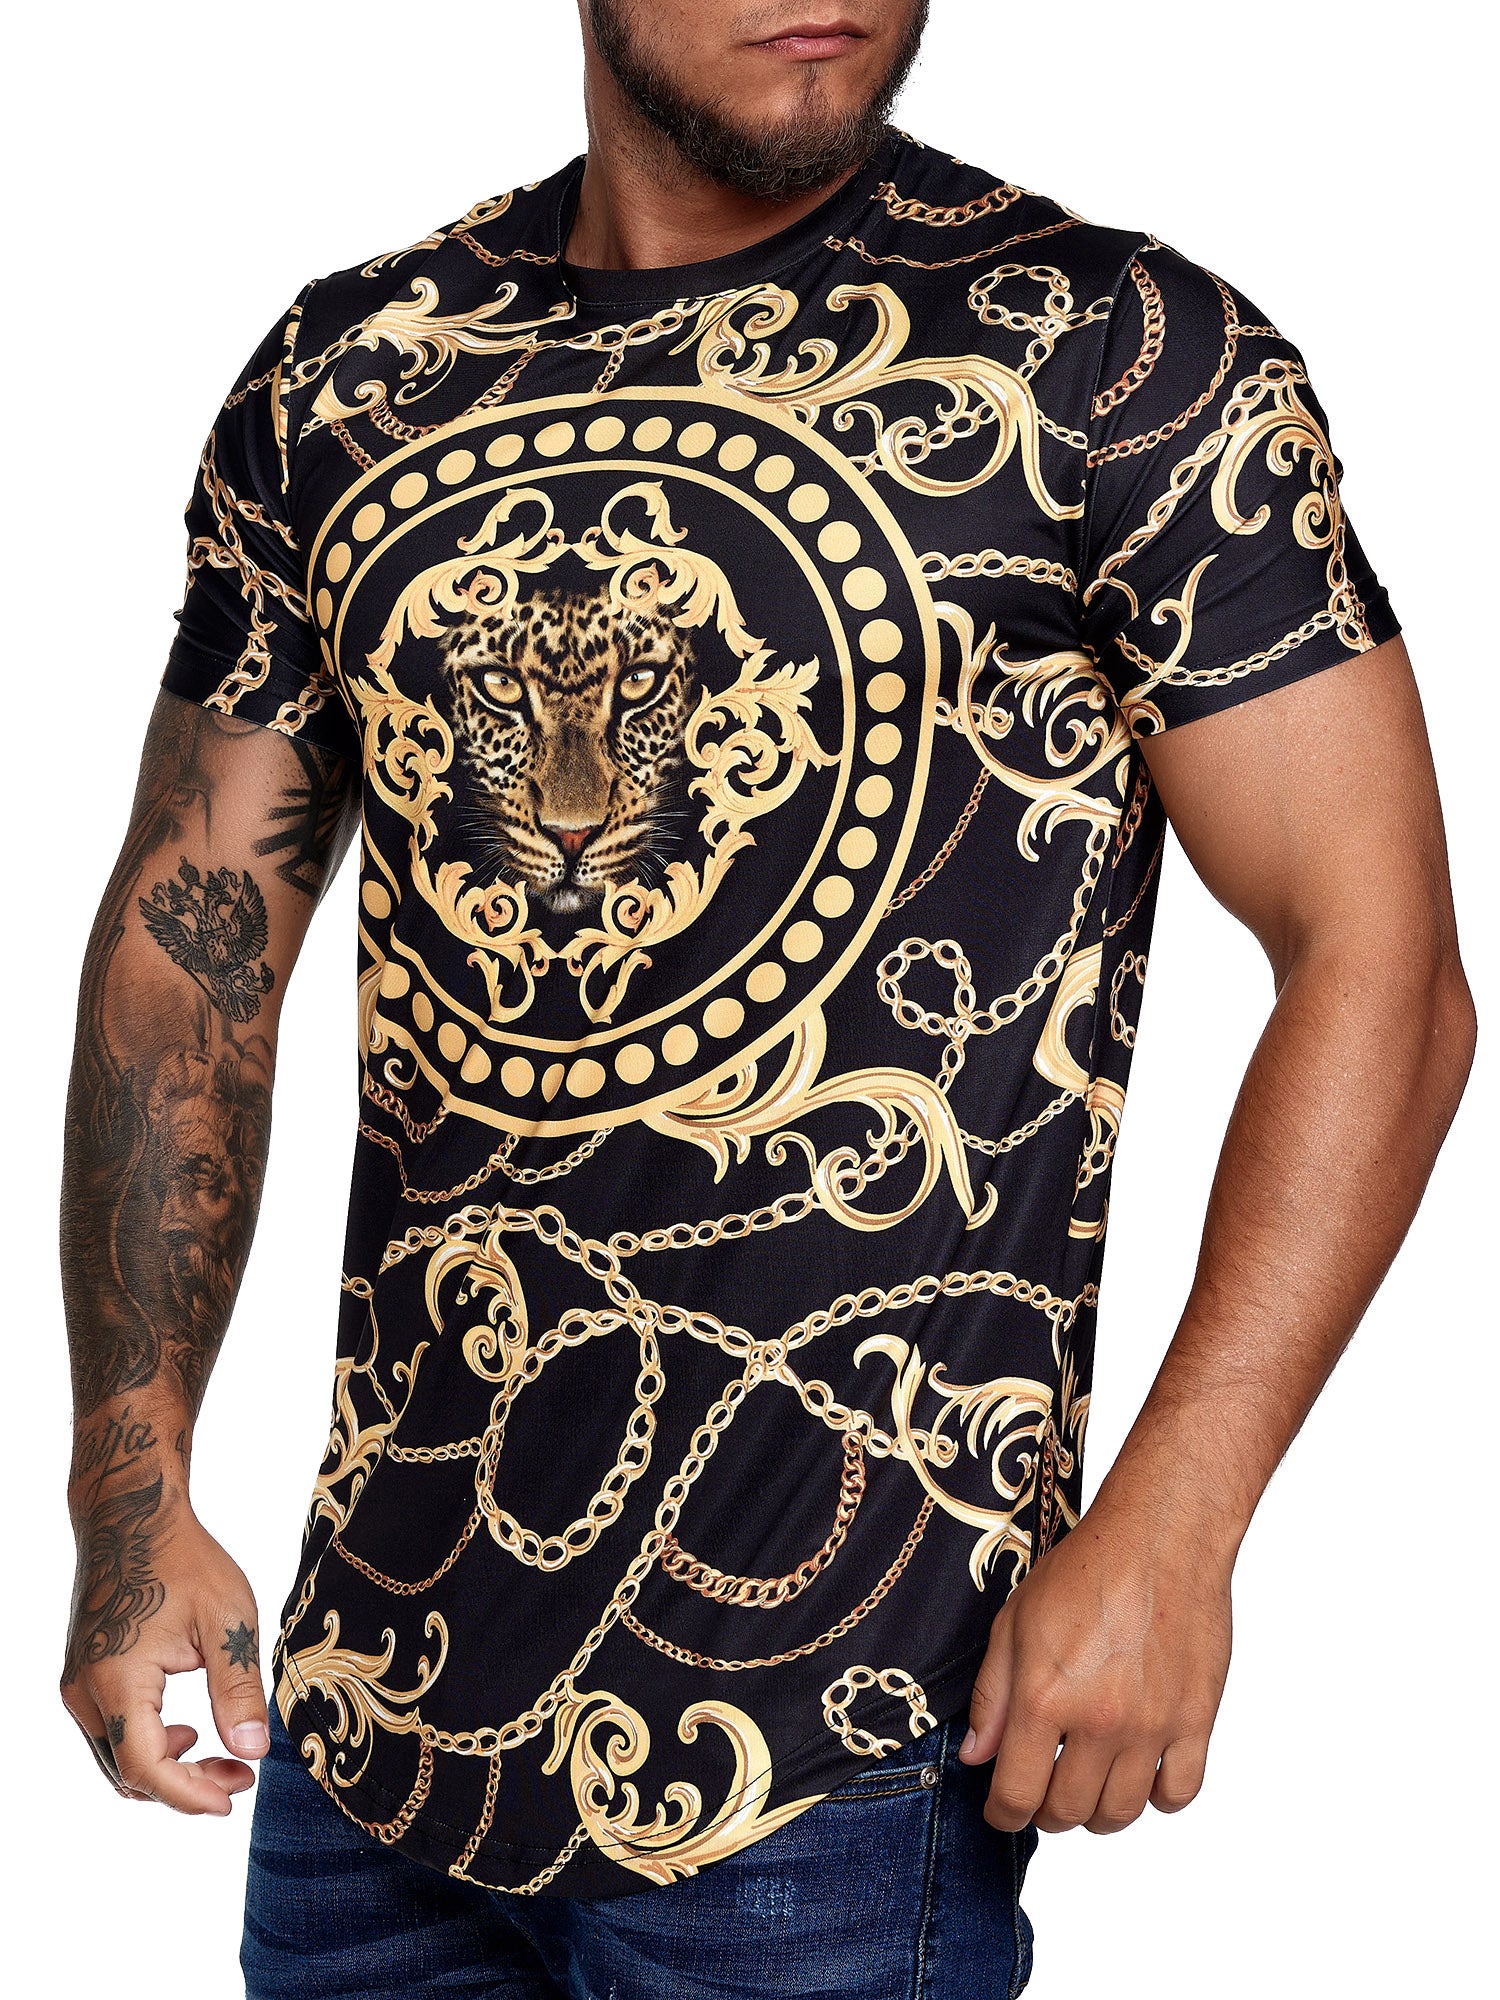 Chained Leo Graphic T-Shirt - Black Gold X67A - FASH STOP